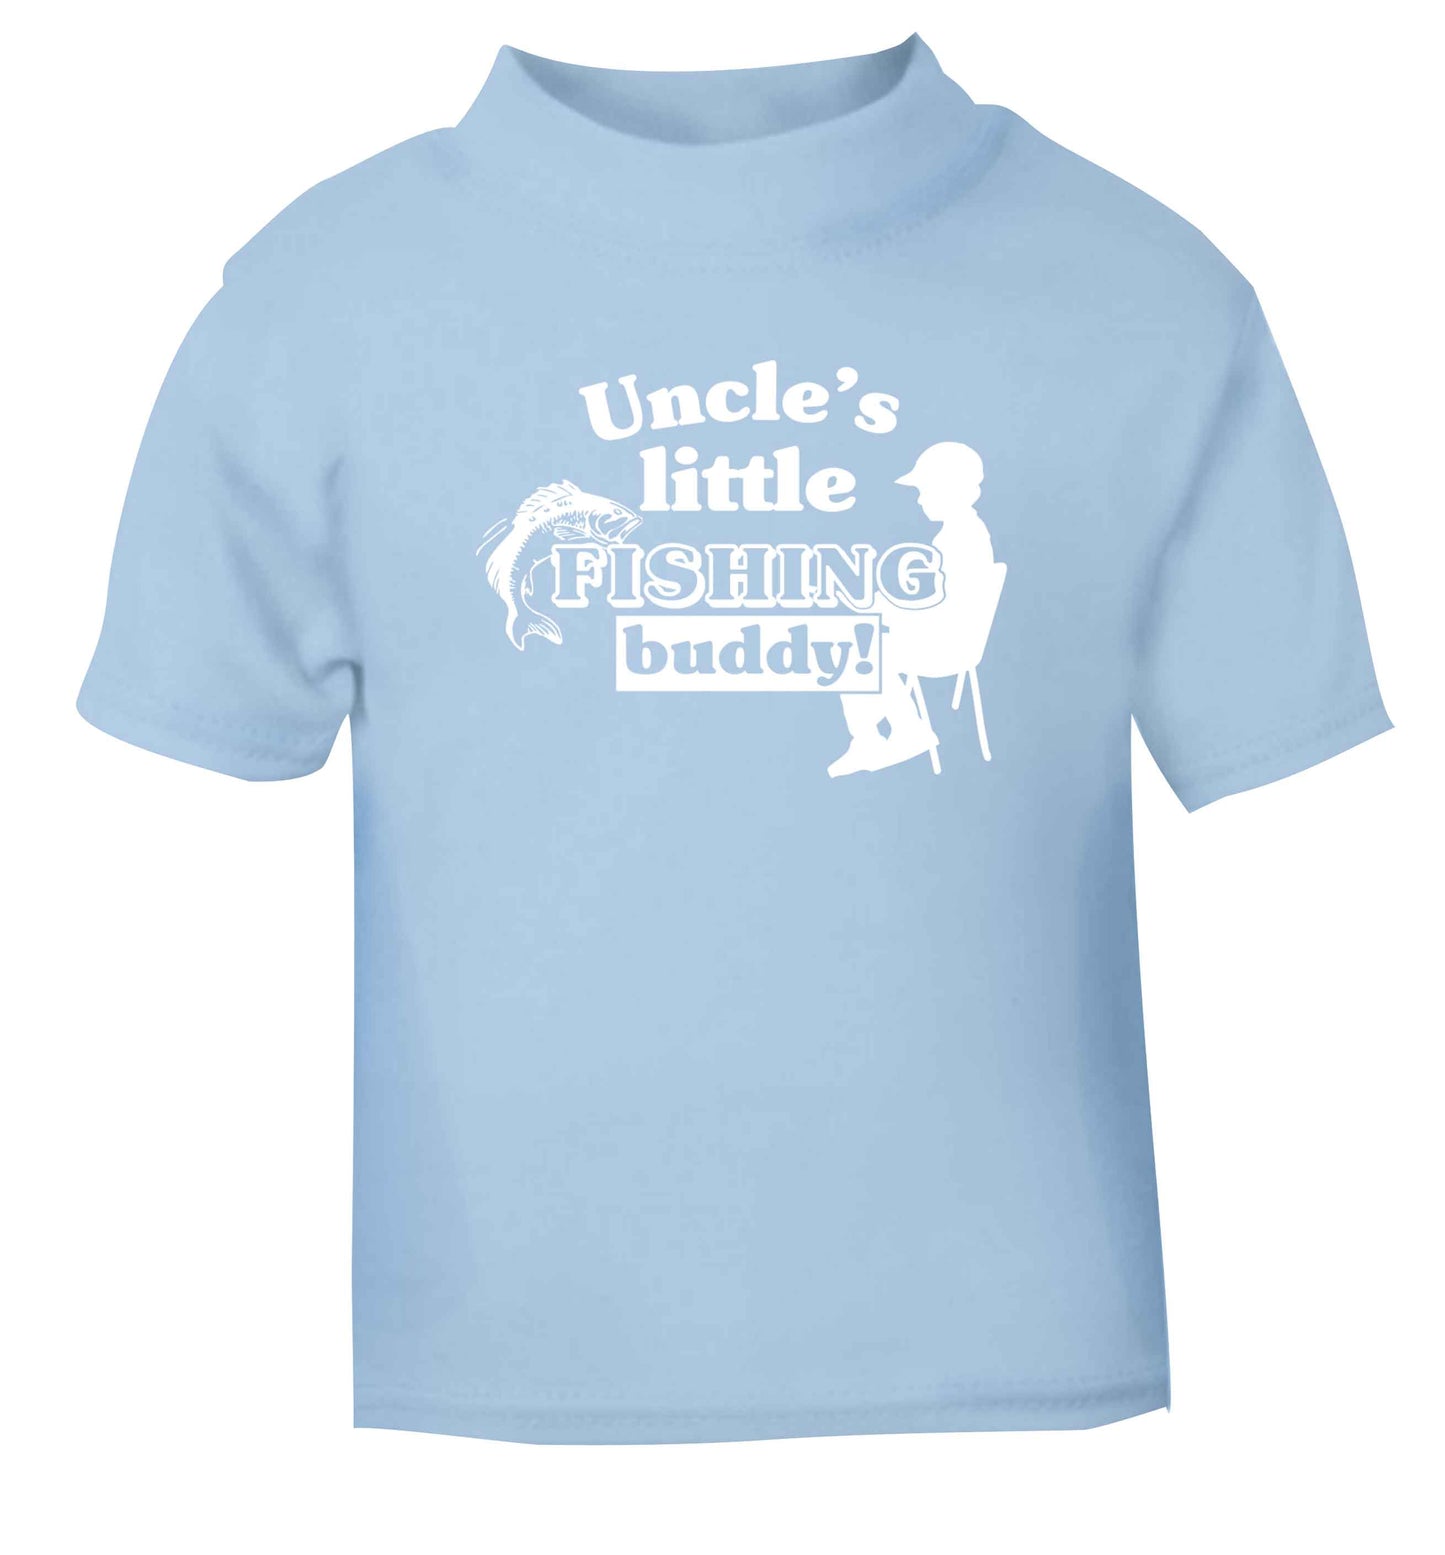 Uncle's little fishing buddy light blue Baby Toddler Tshirt 2 Years